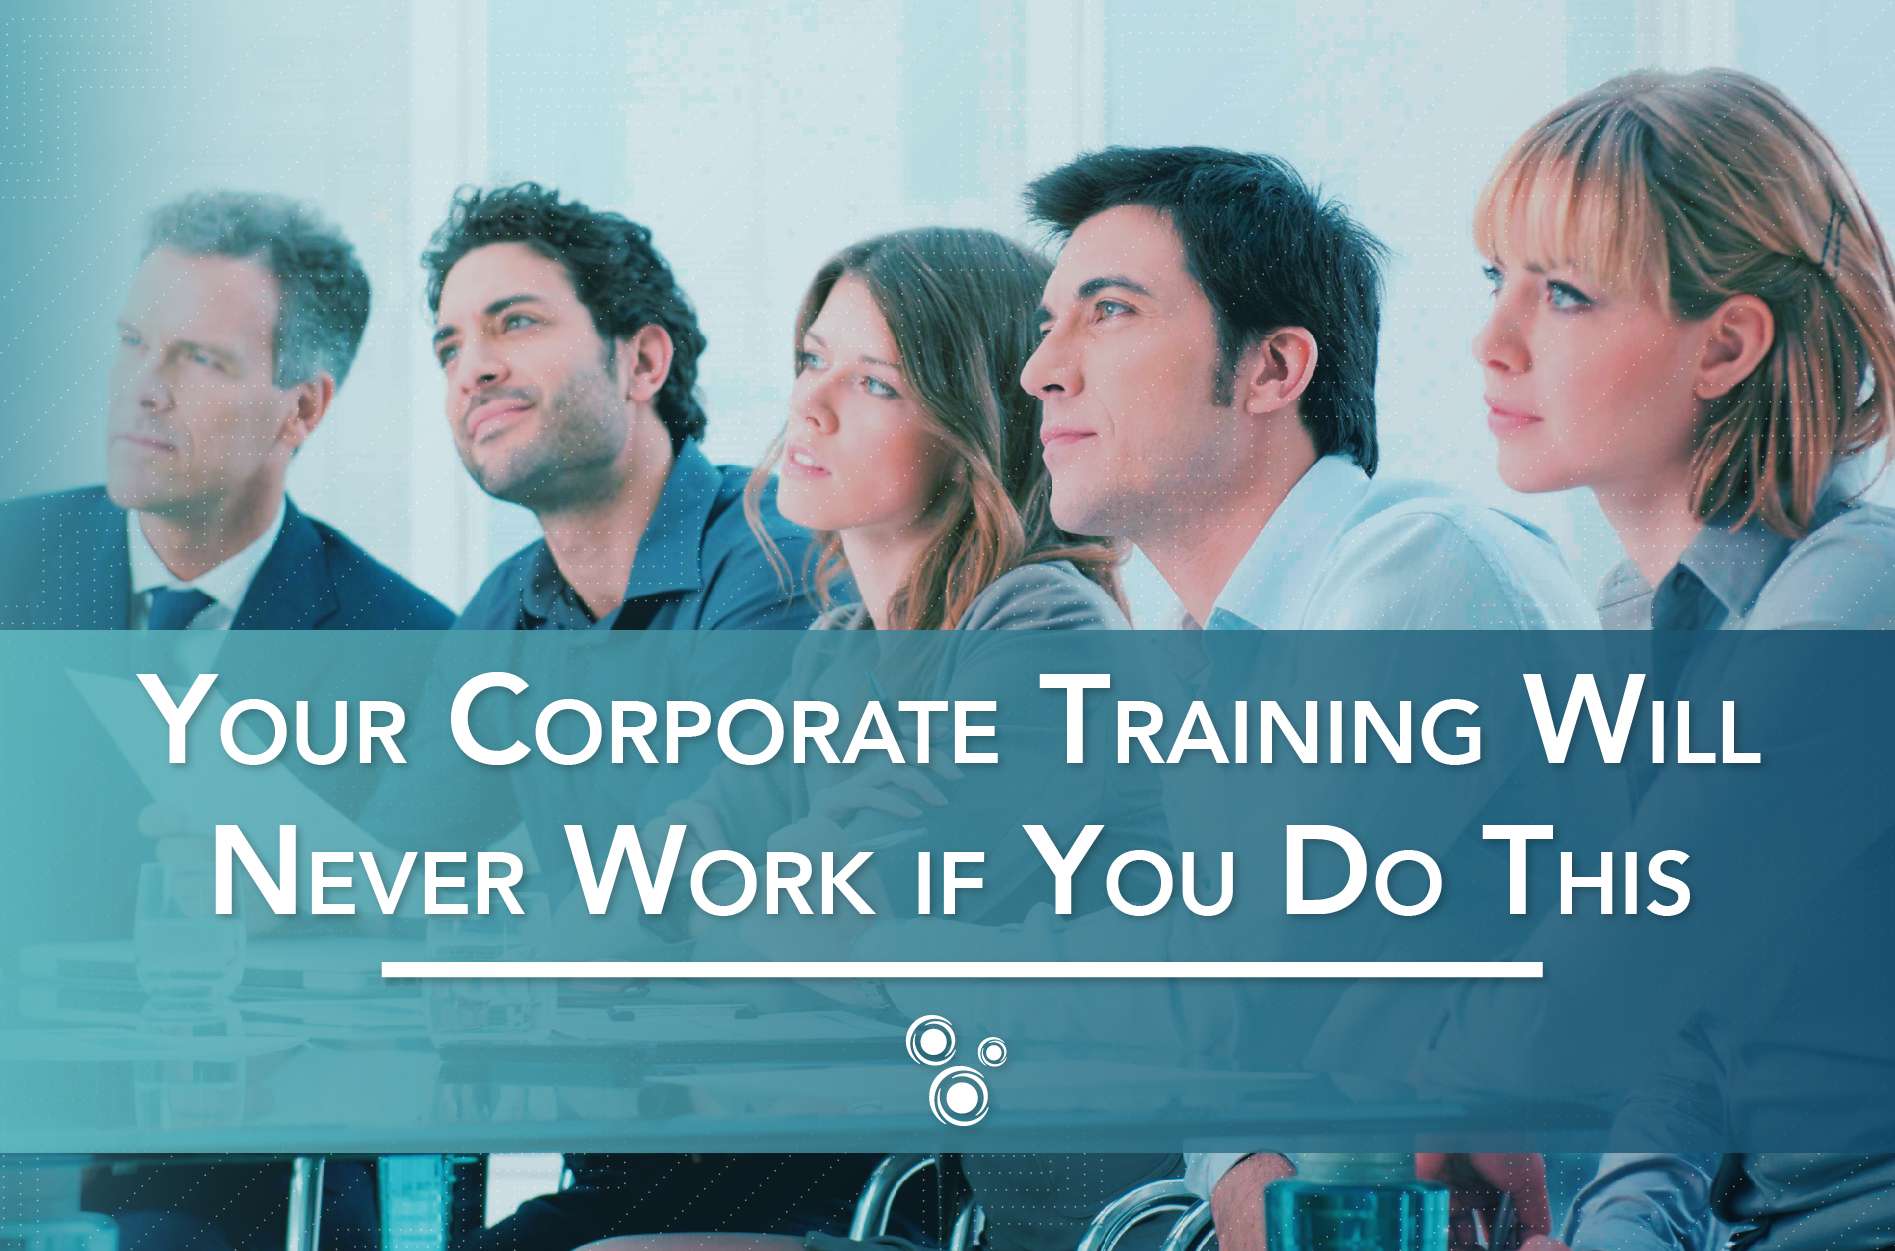 Your Corporate Training Will Never Work If You Do This